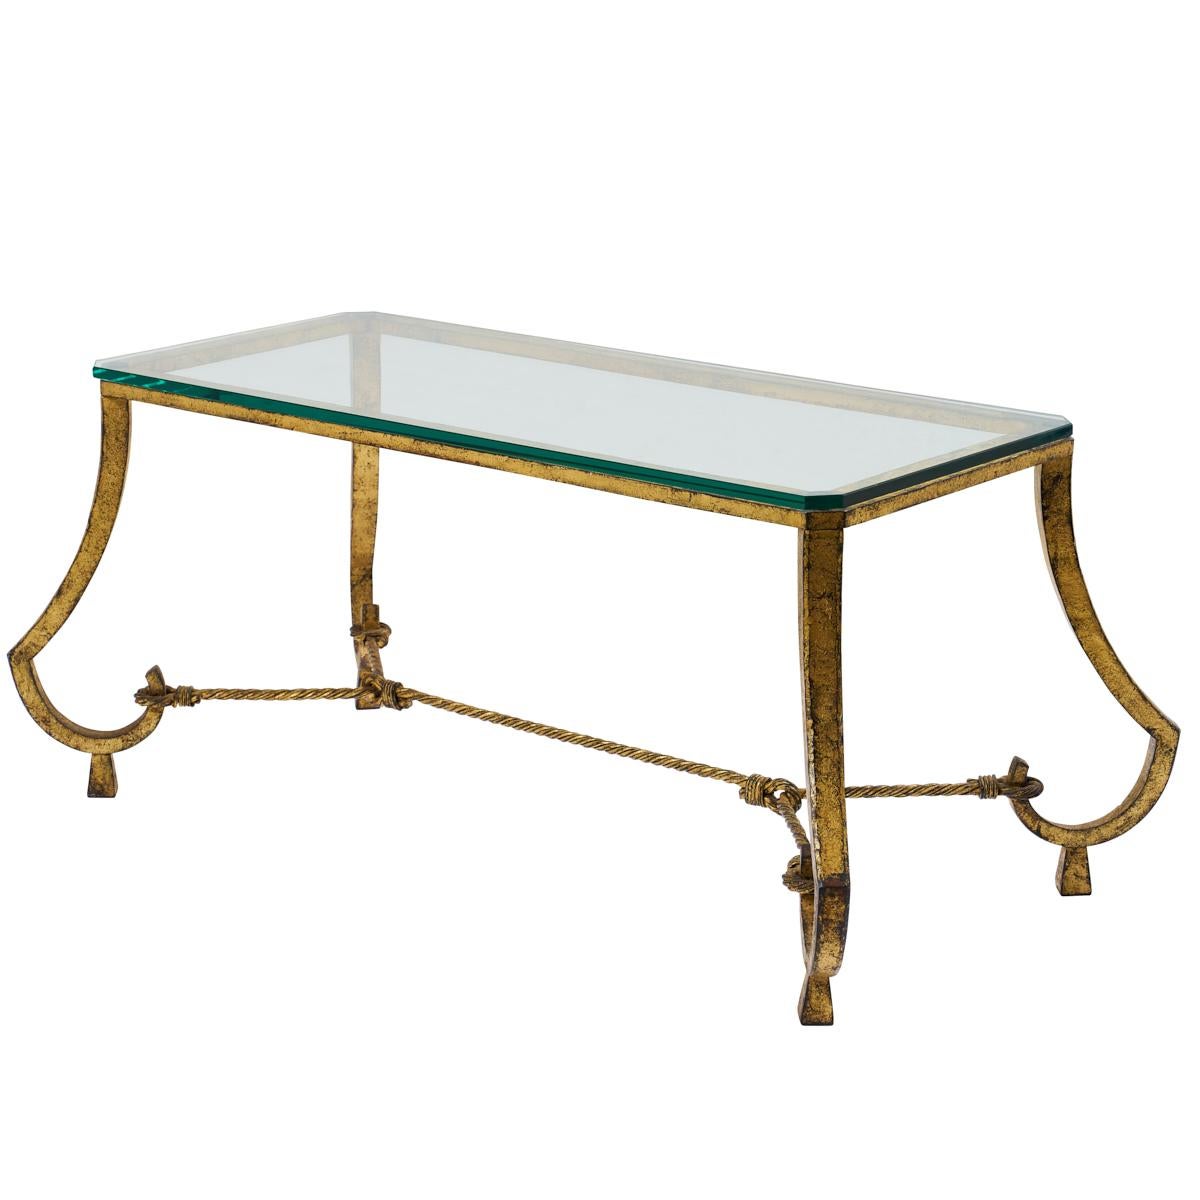 A vintage find from France, this petite bronze and glass coffee table has elegant lines and chic rope detailing.